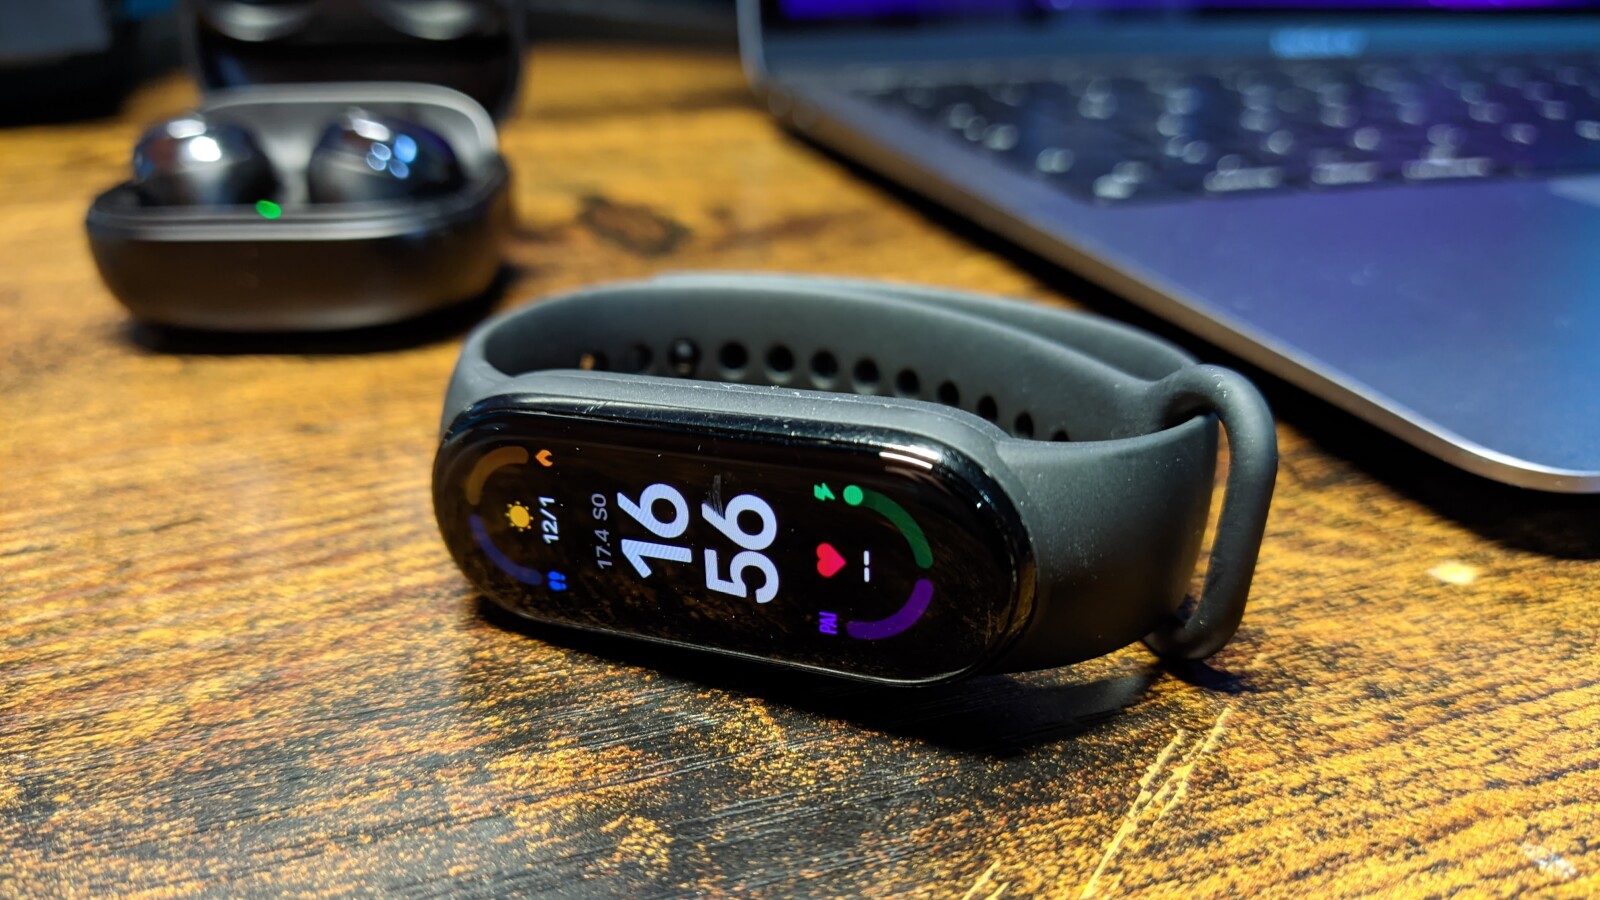 Xiaomi Mi Band 6: Change the fitness tracker's vibration alarm - Here's how